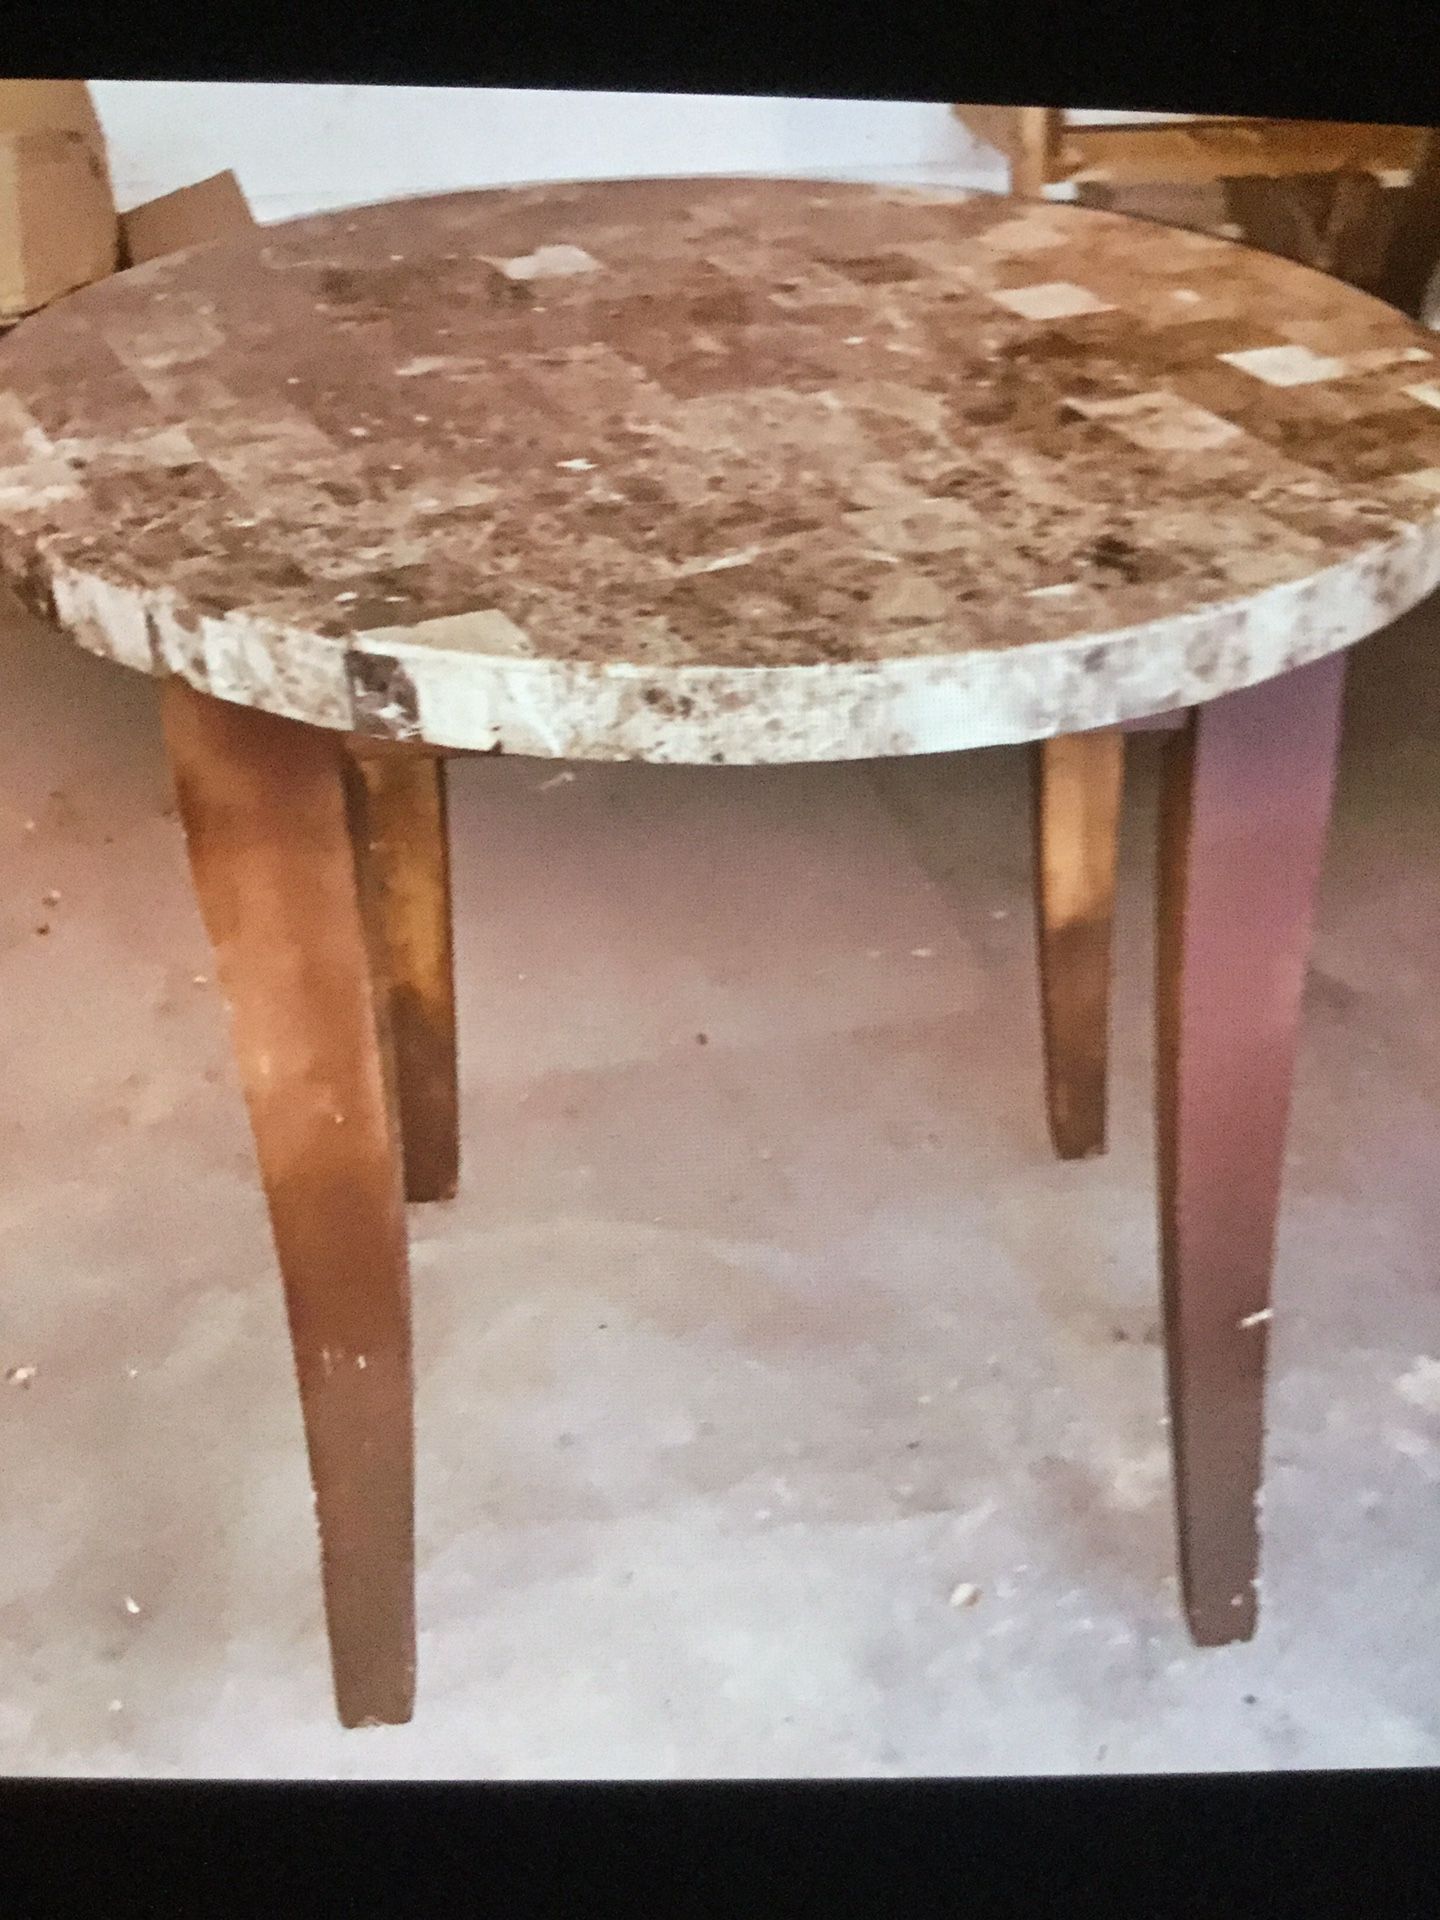 3 foot tall table